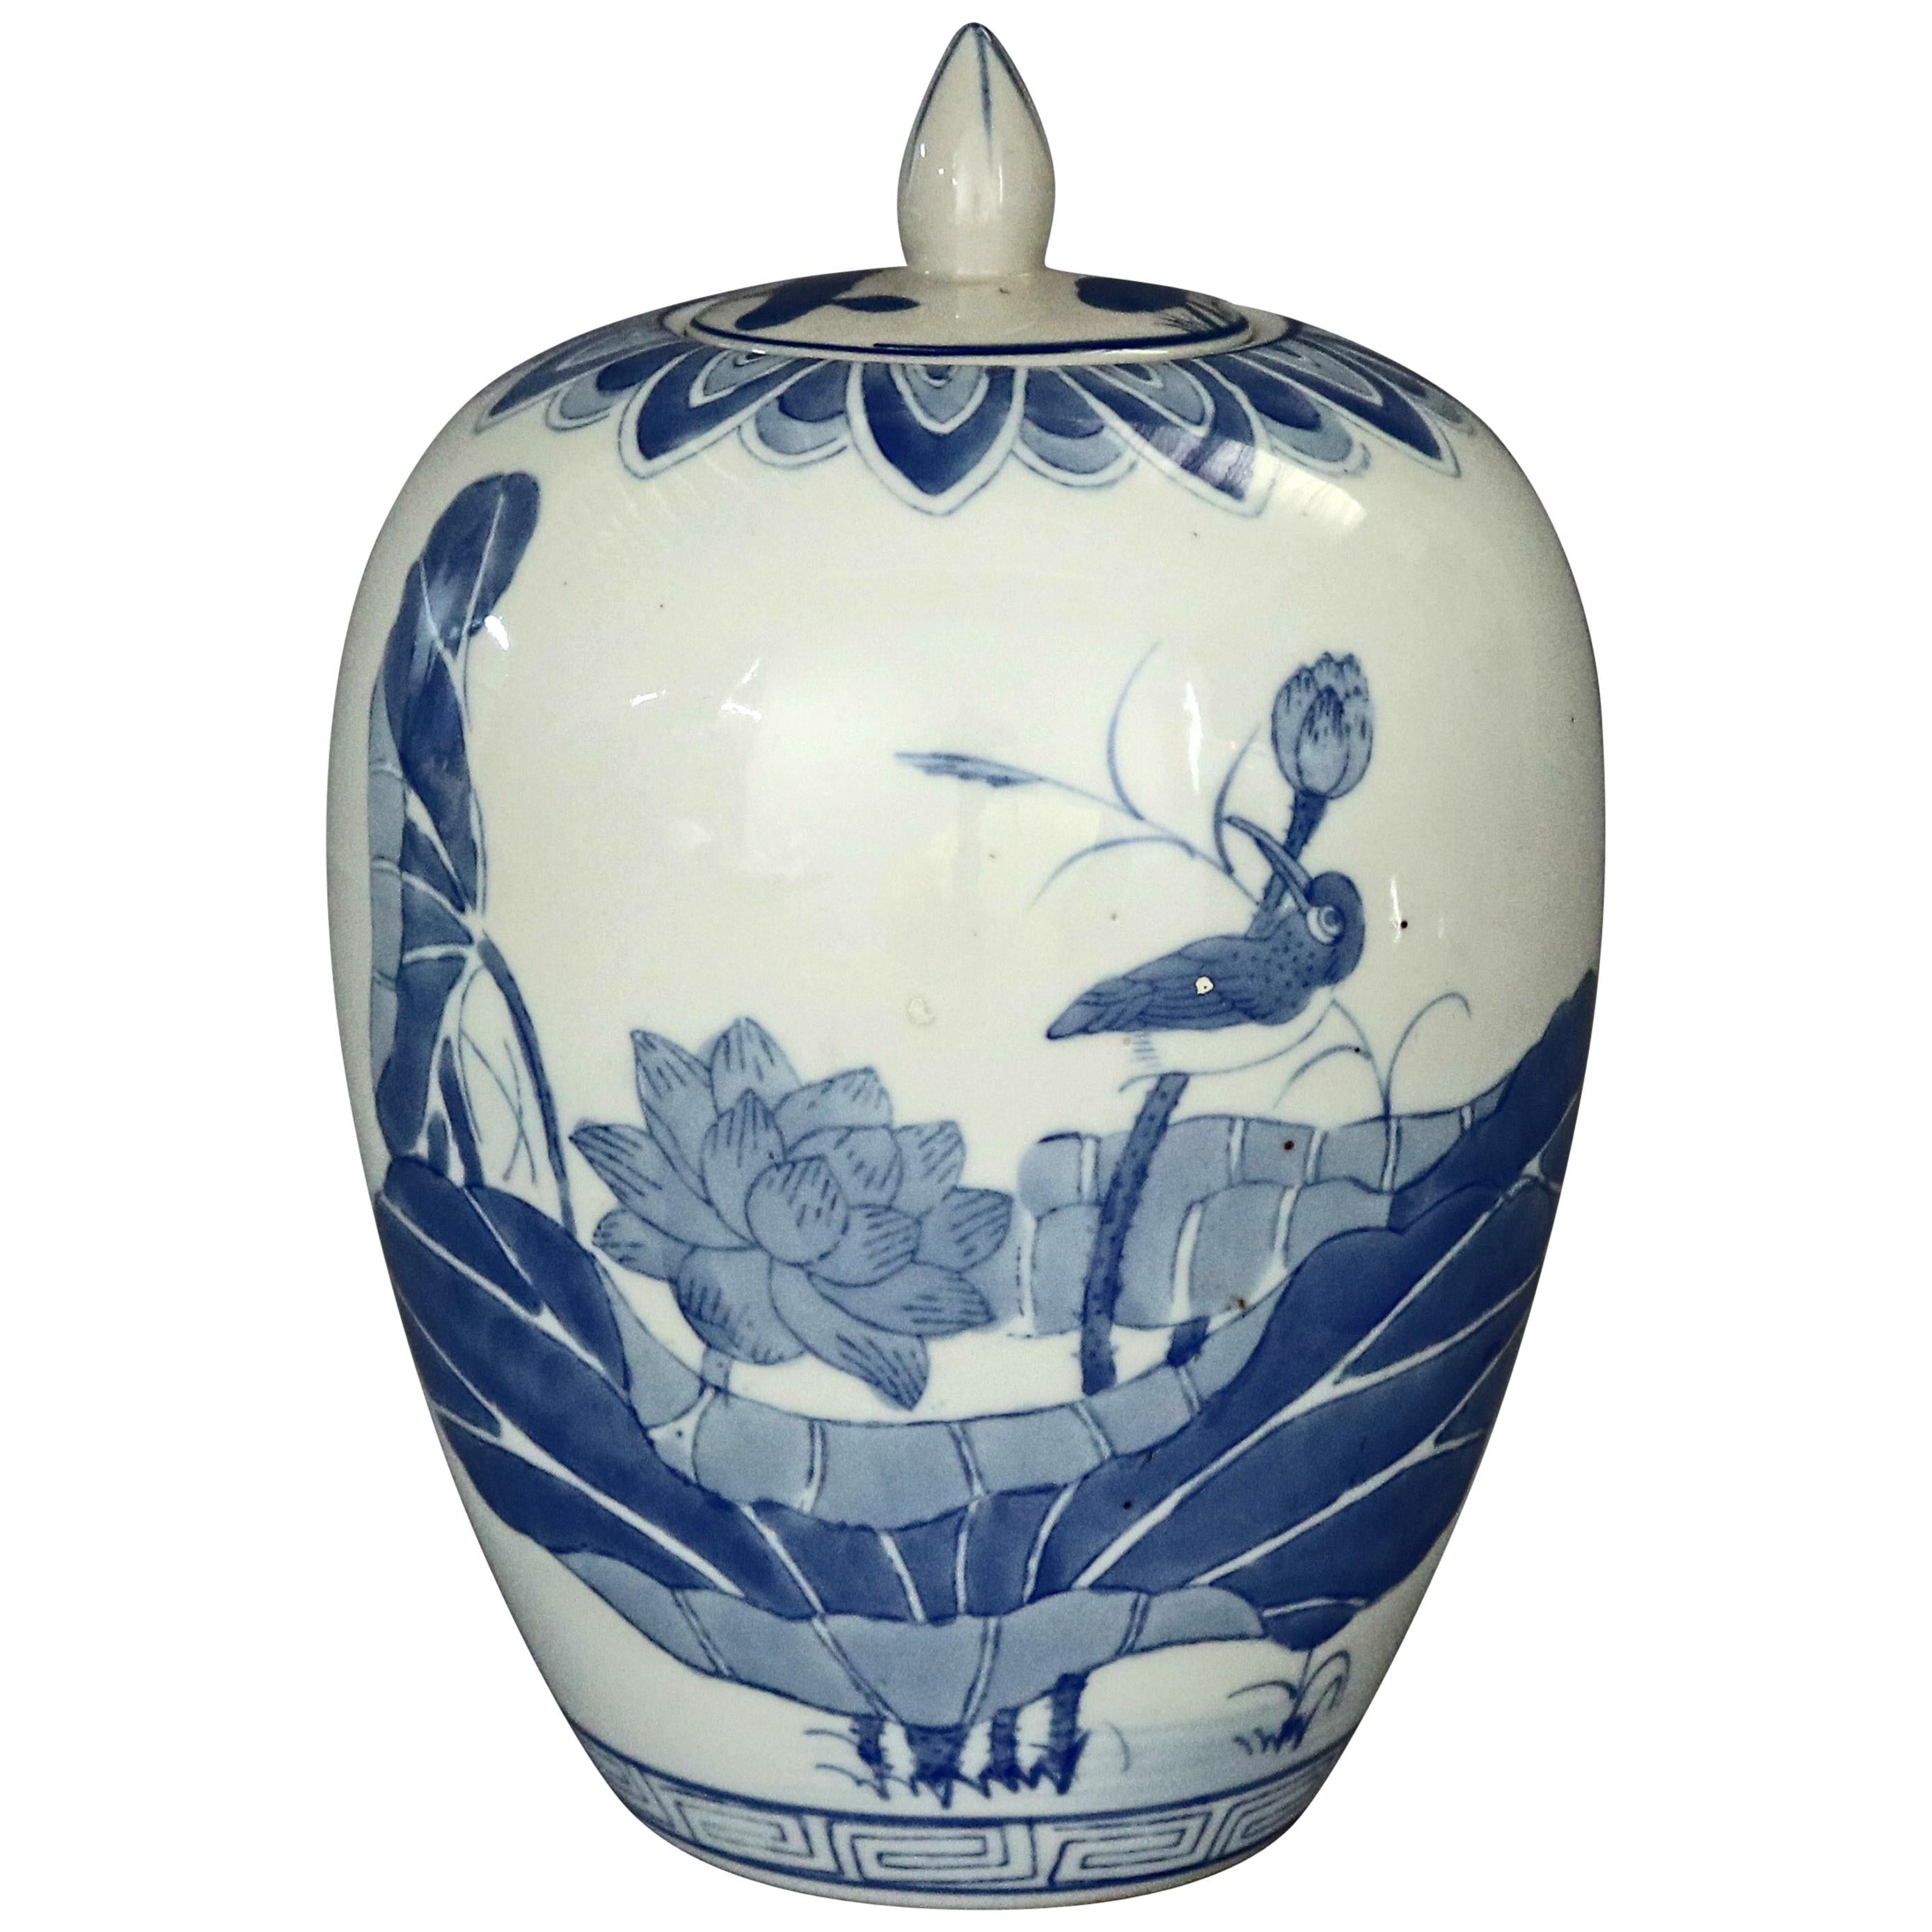 Chinese Blue and White Pictorial Porcelain Jar with Marsh Scene, 20th Century